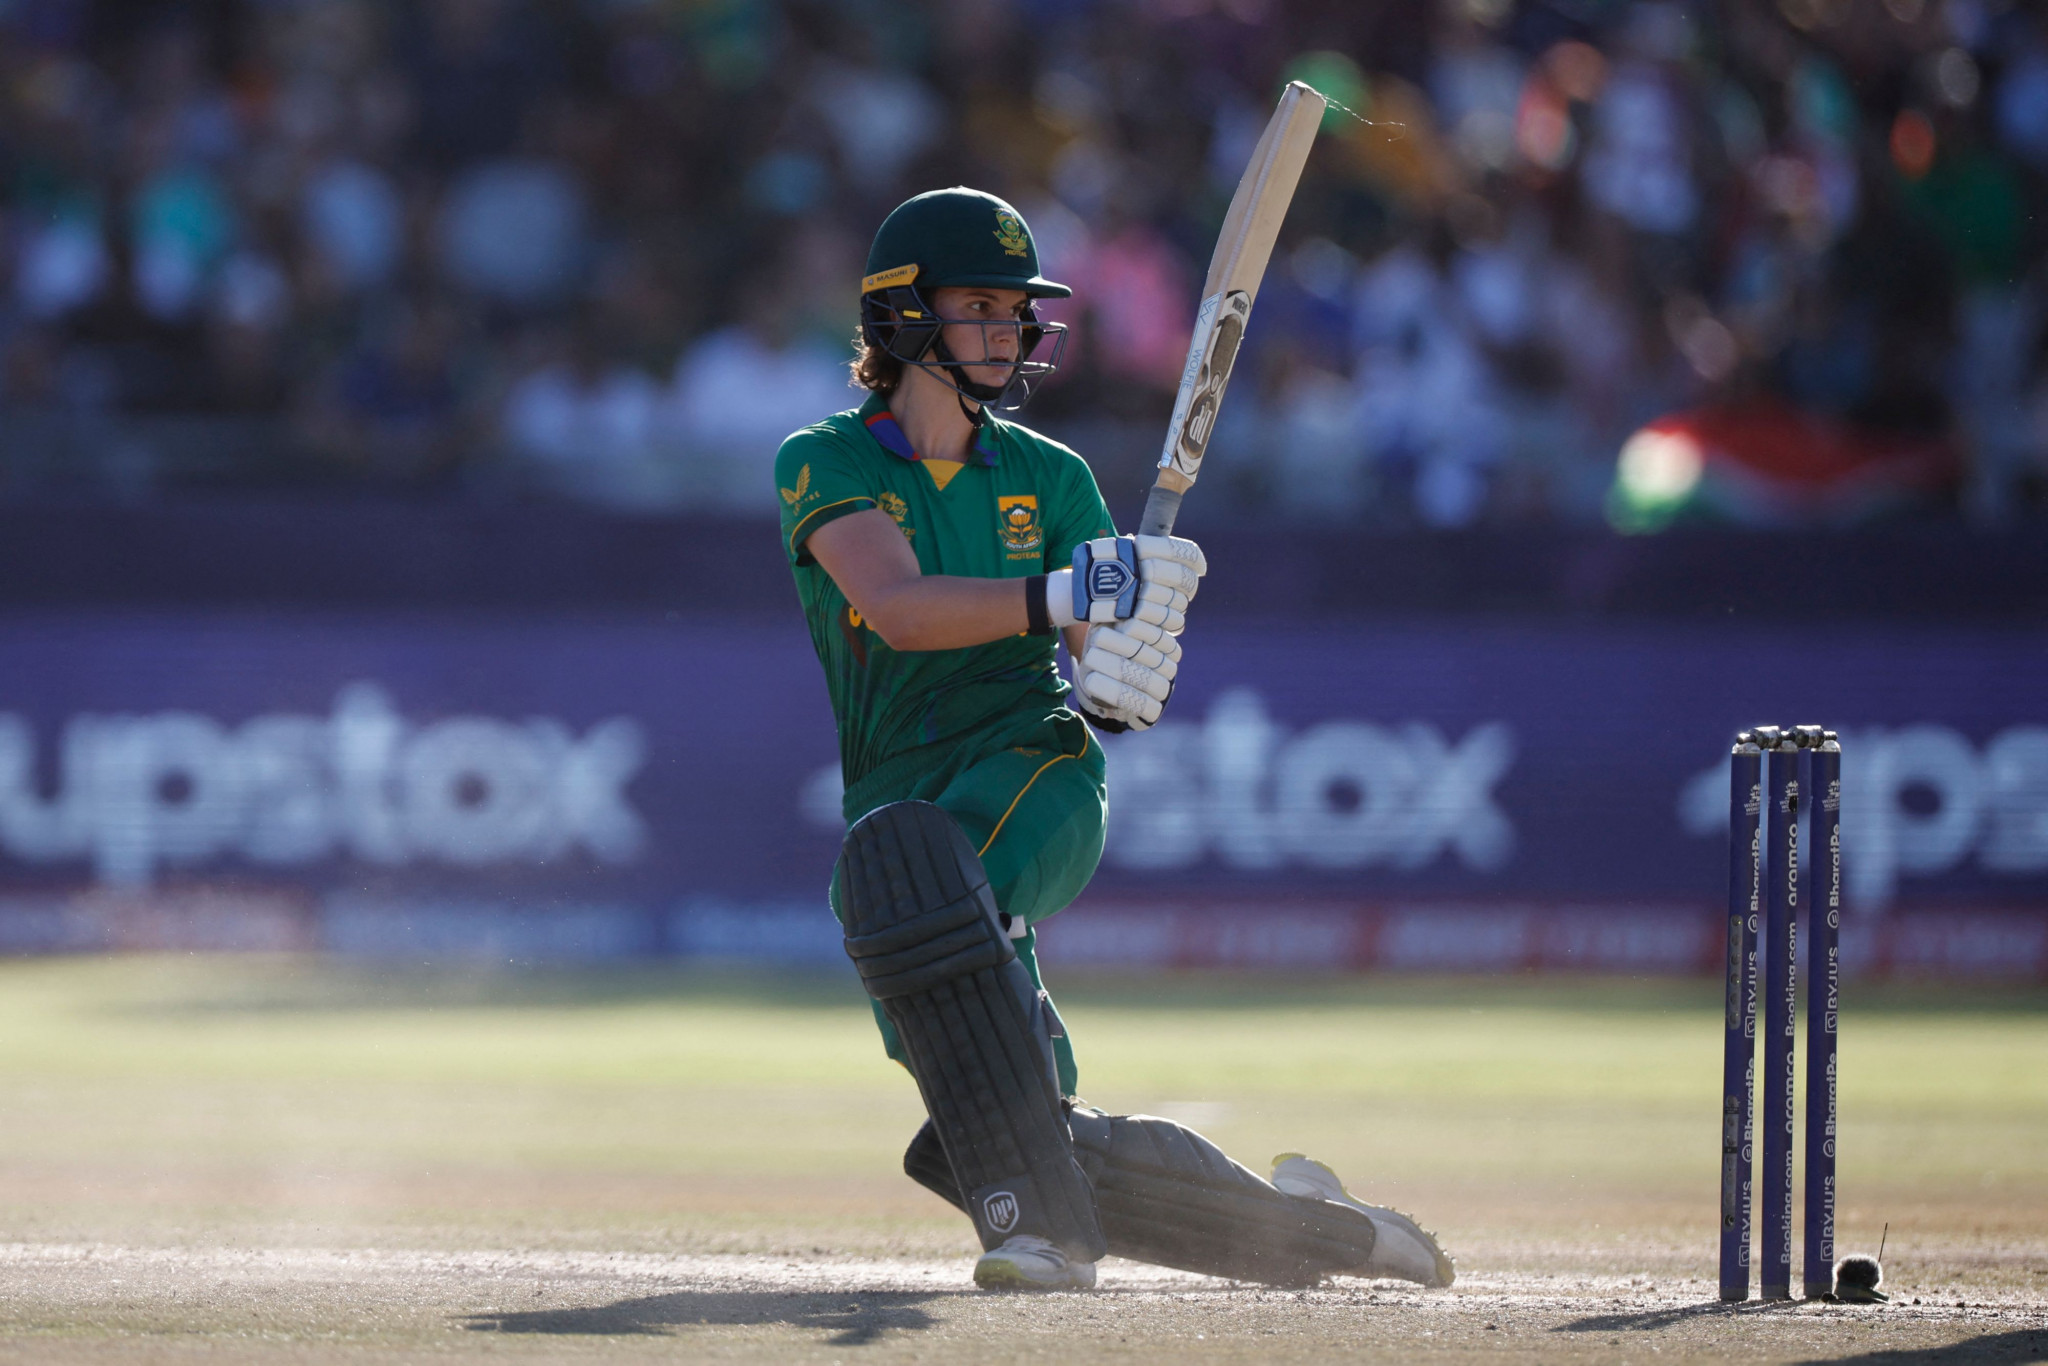 South Africa's Laura Wolvaardt, who made 230 runs and top scored for South Africa in the final with 61 made the cut ©Getty Images

